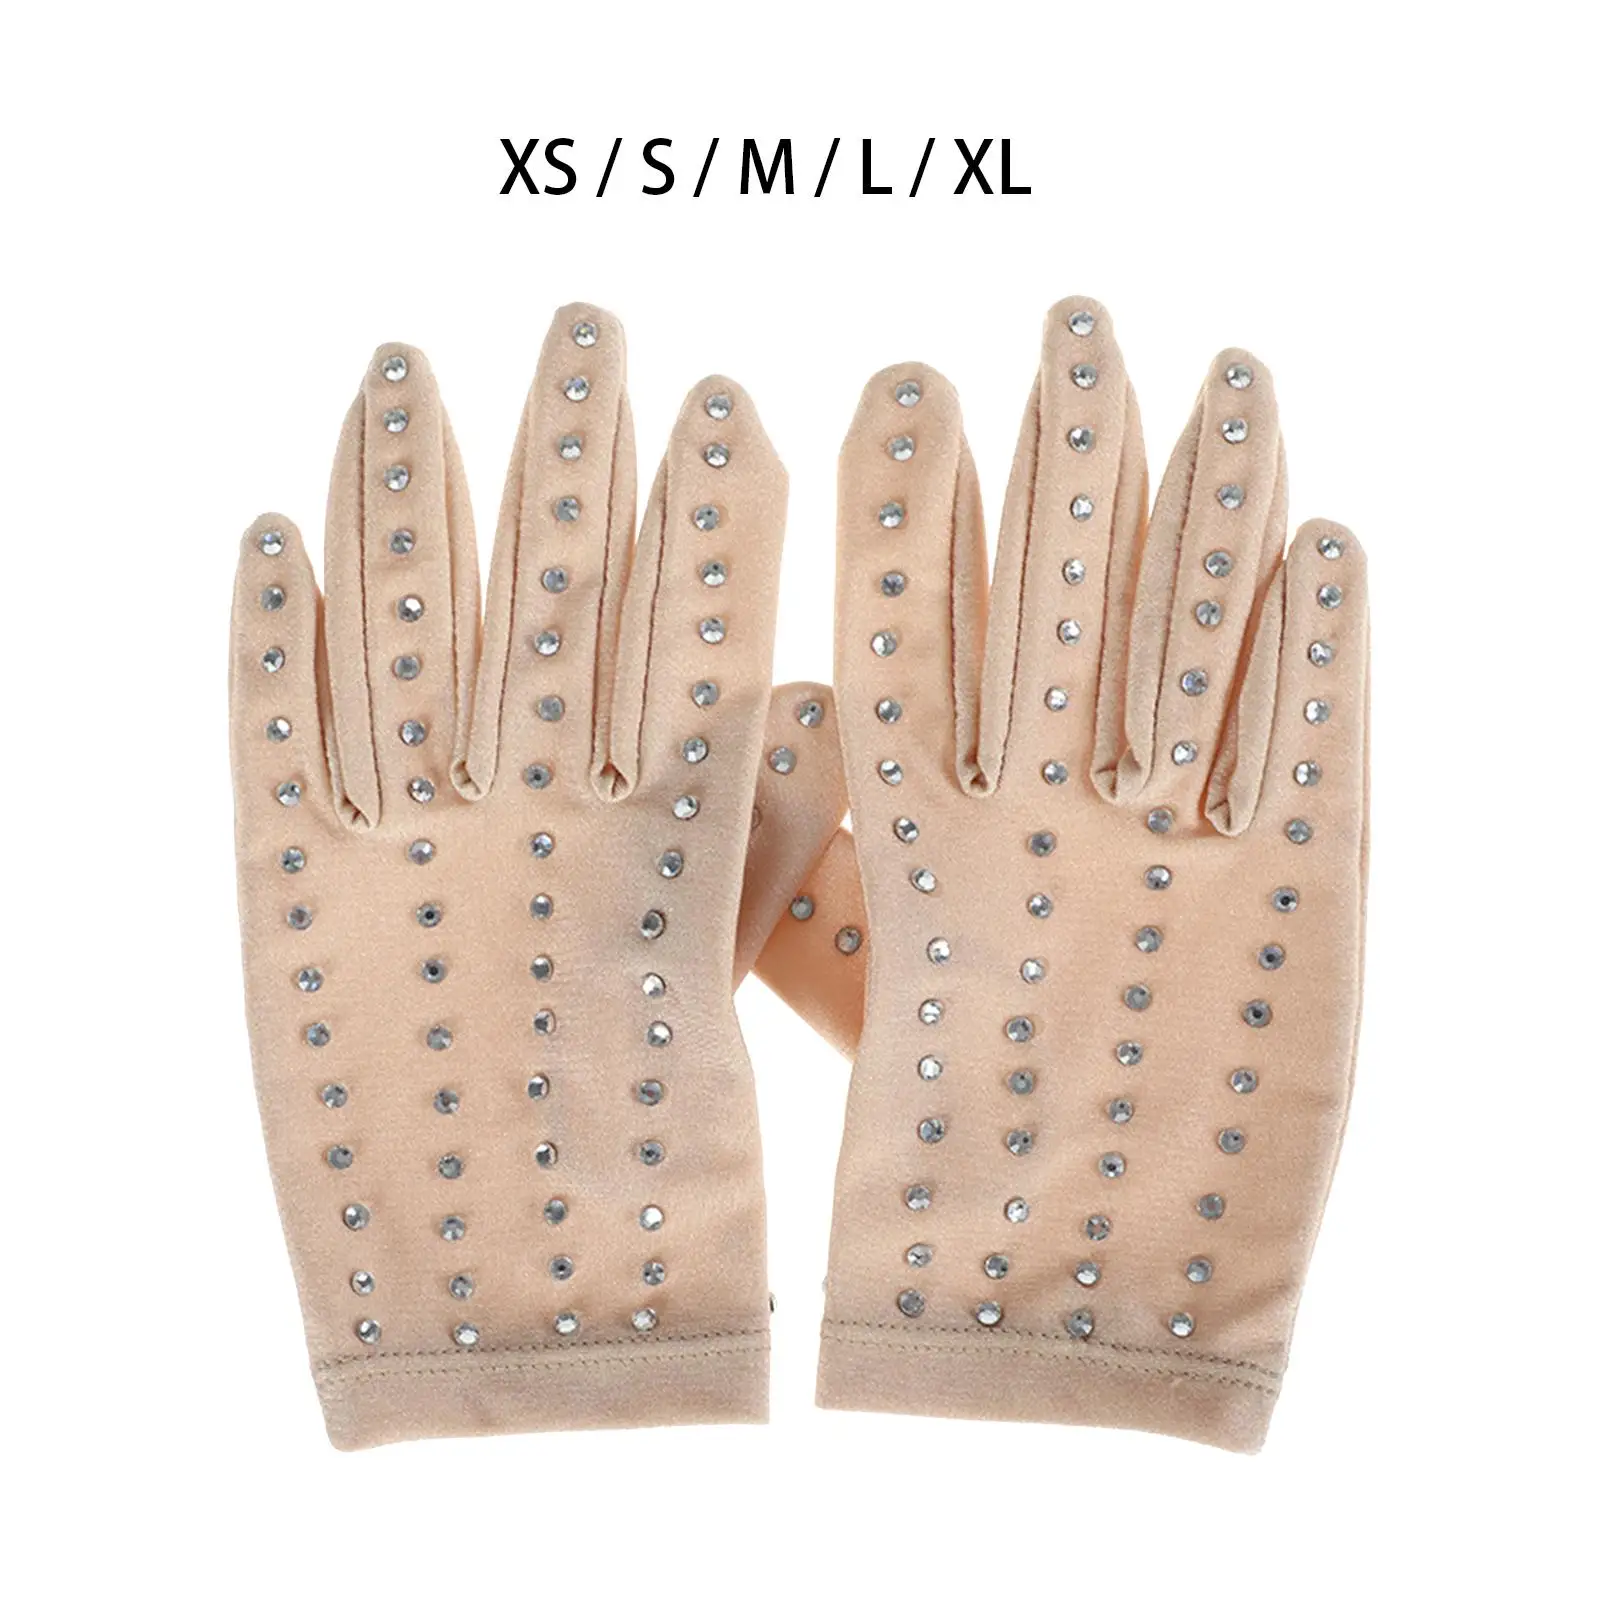 Women Ice Figure Skating Gloves with Rhinestones Decoration Fashion Skating Accessories for Show Performance Competition Dance